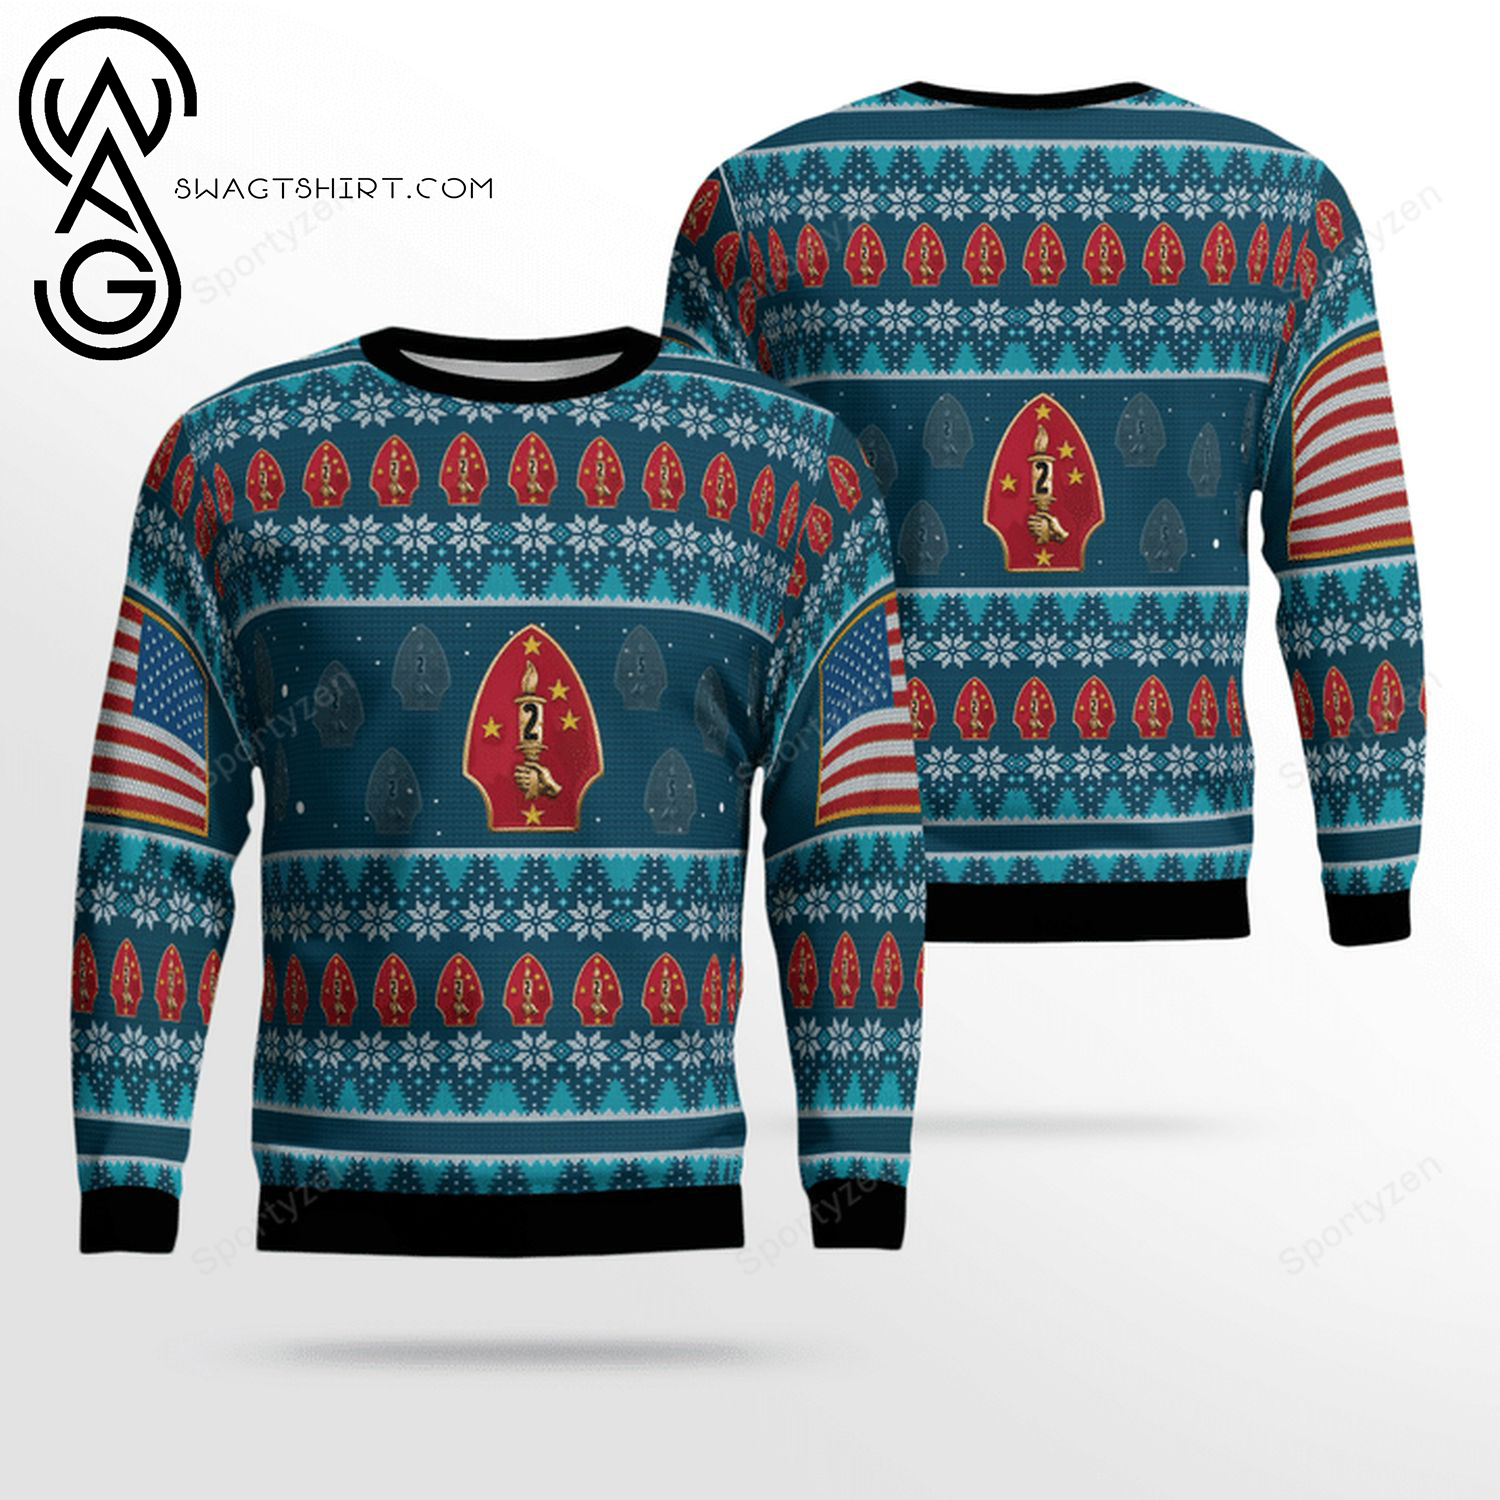 The 2nd Marine Division Full Print Ugly Christmas Sweater